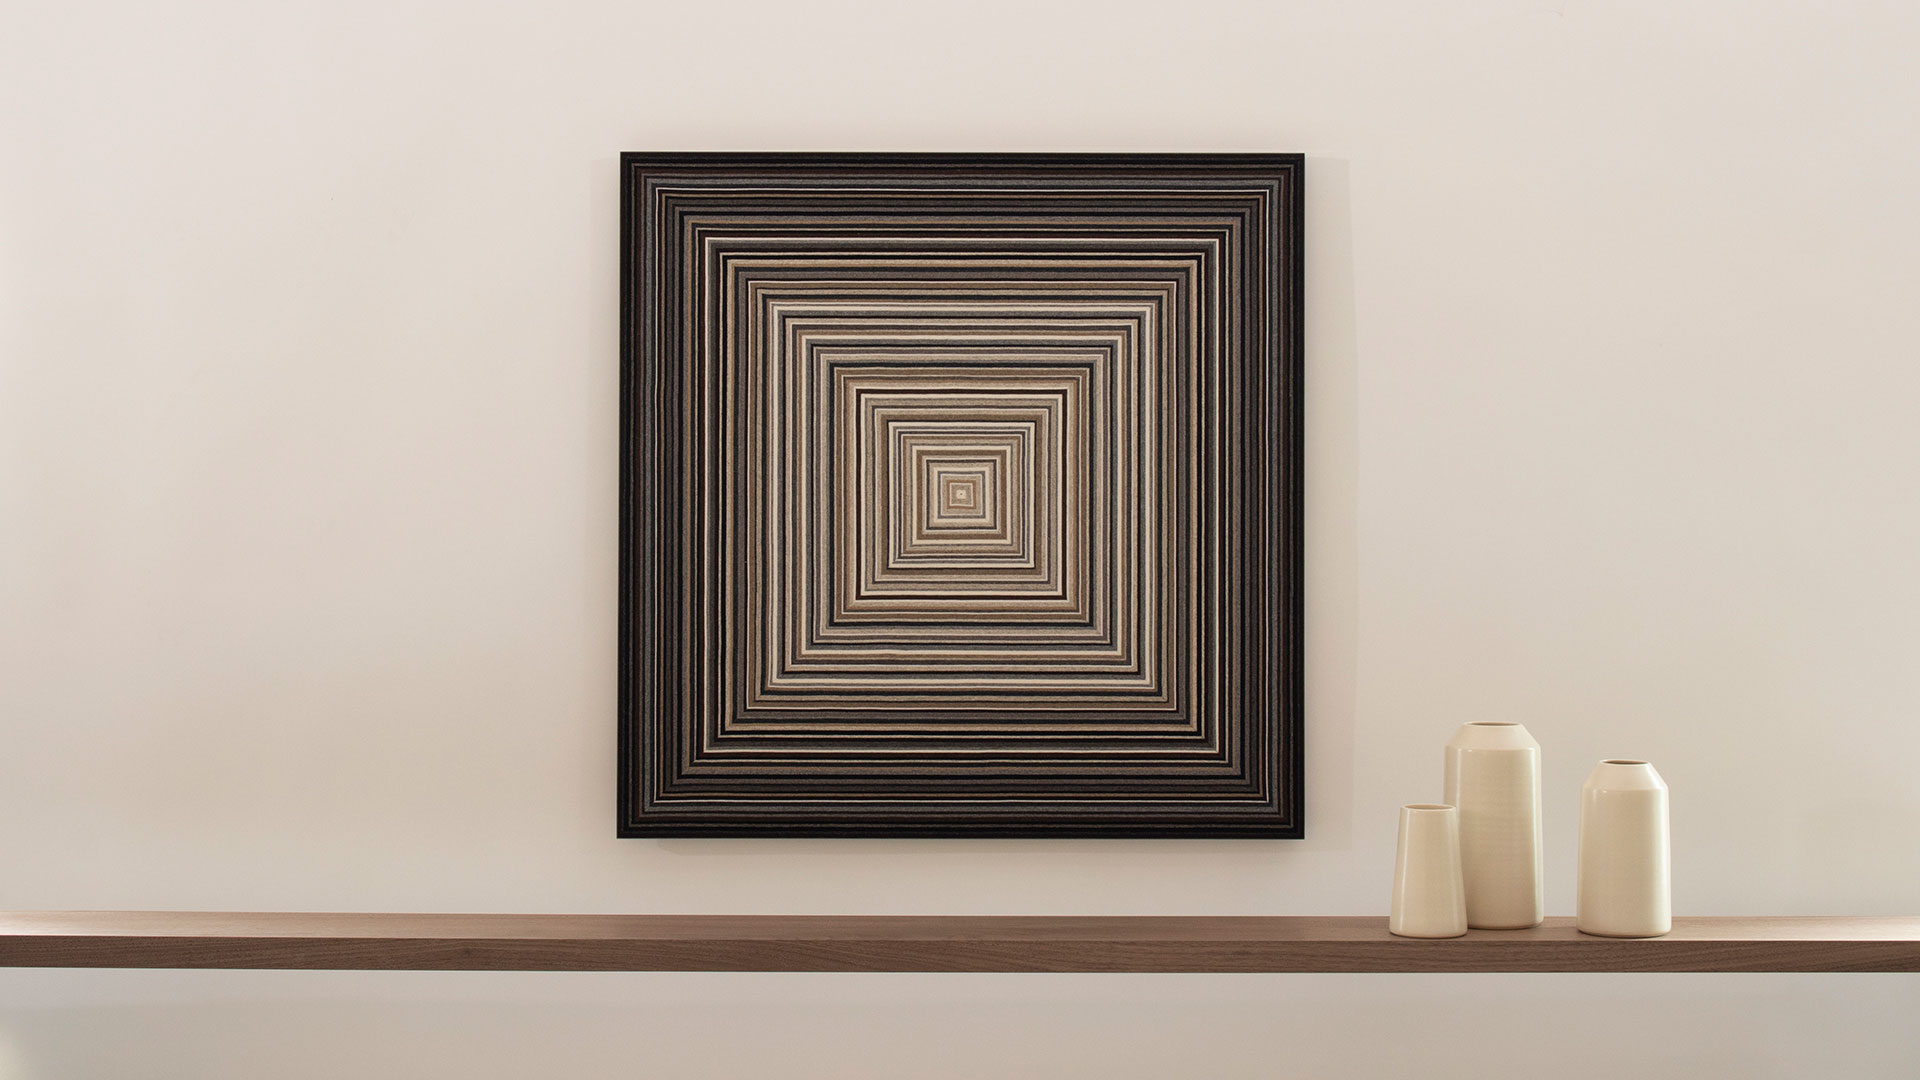 Square felt wall panel with concentric square lines in browns and grays.